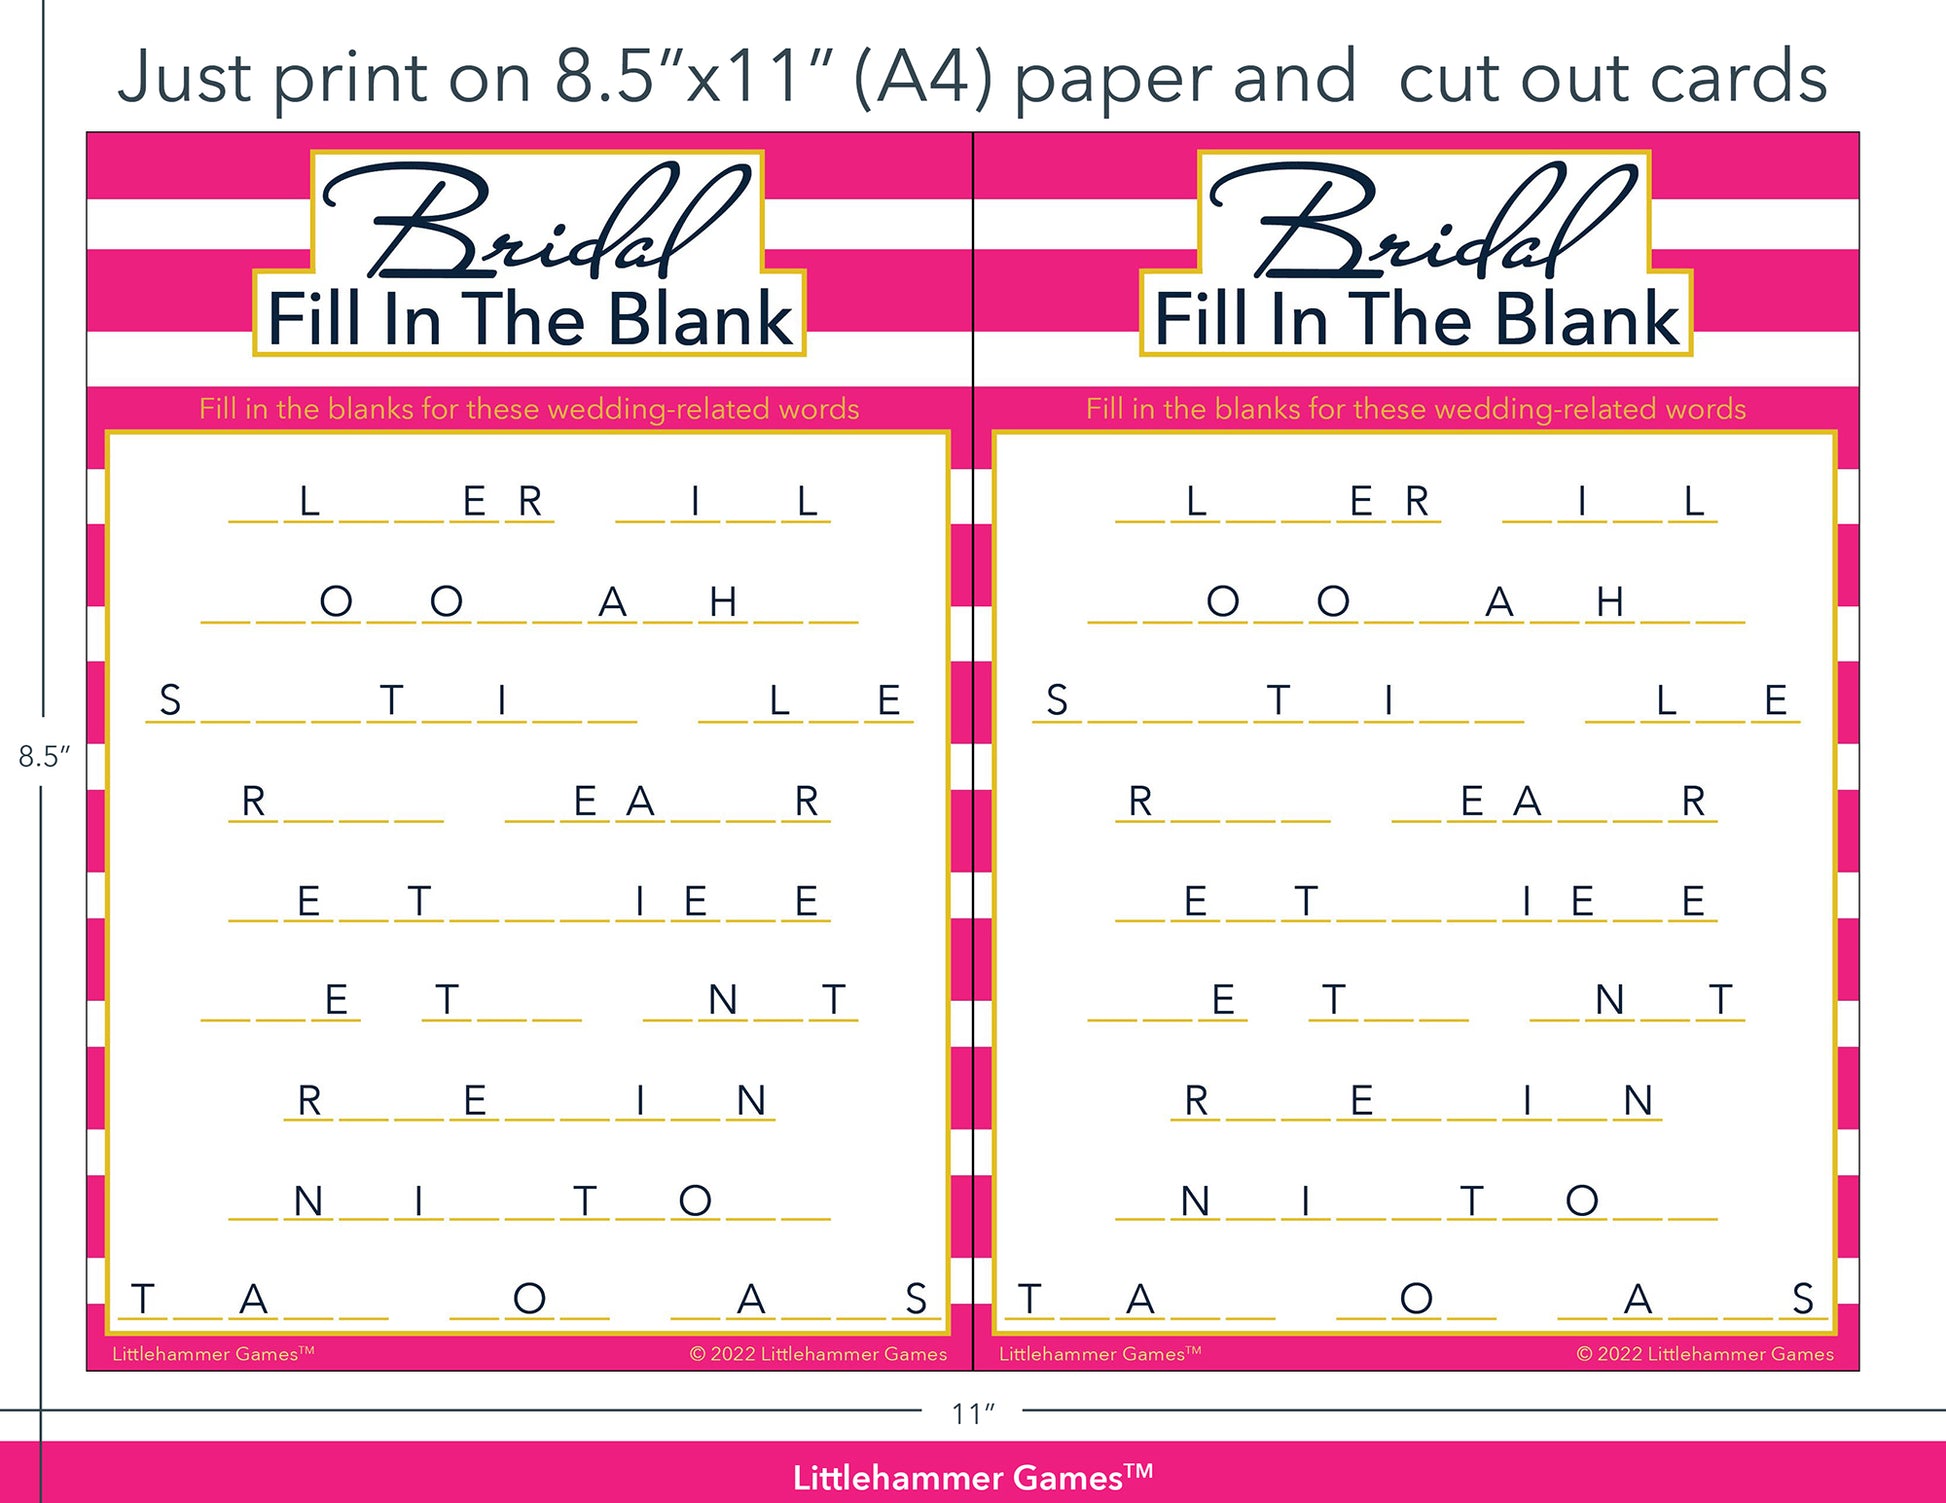 Bridal Fill in the Blank pink-striped game cards with printing instructions